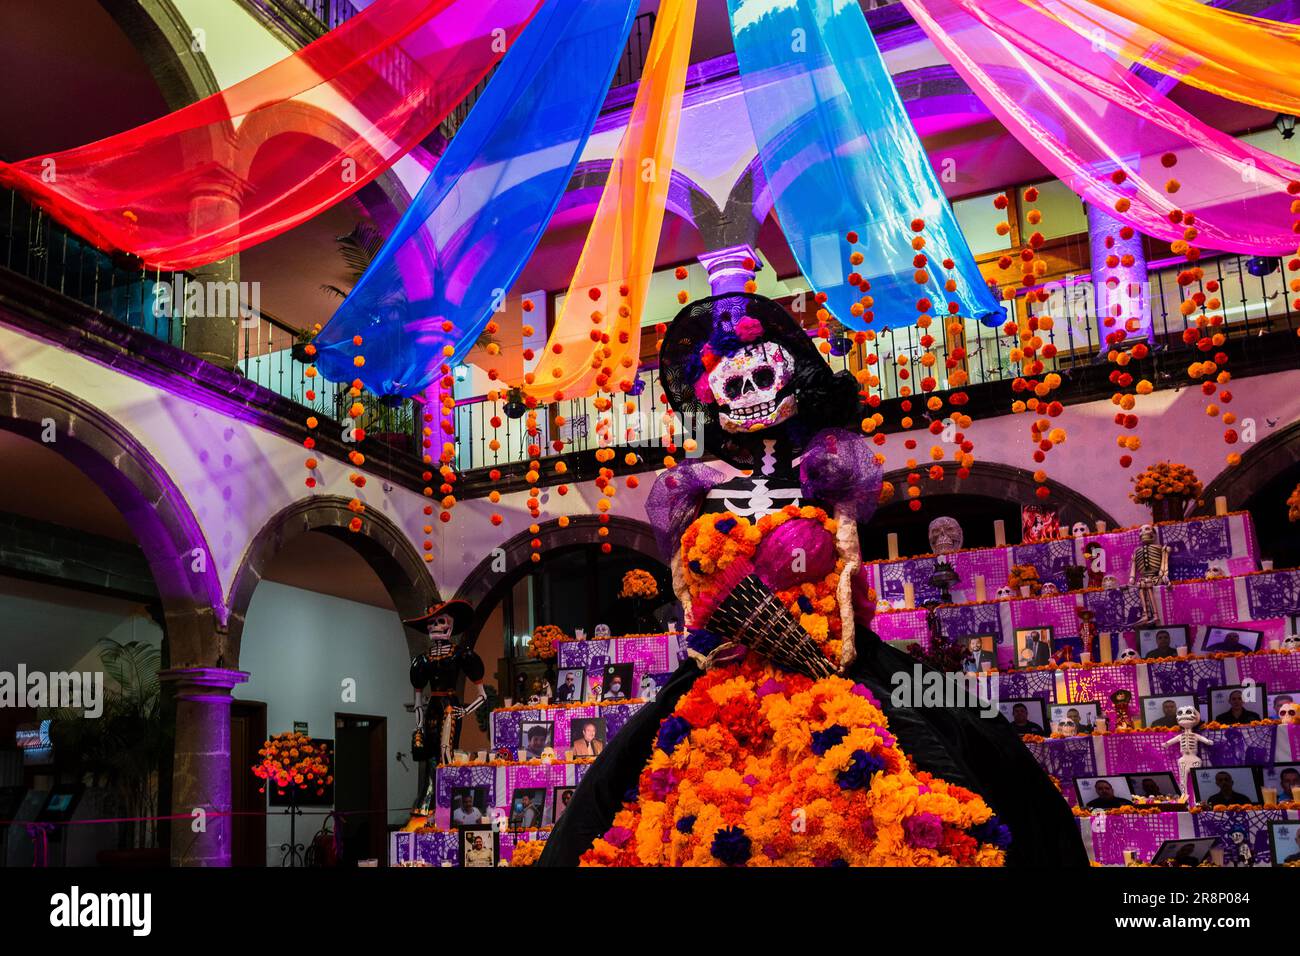 La Catrina figure is placed in front of the altar of the dead (Altar de Muertos) during the Day of the Dead celebrations in Tlaquepaque, Mexico. Stock Photo